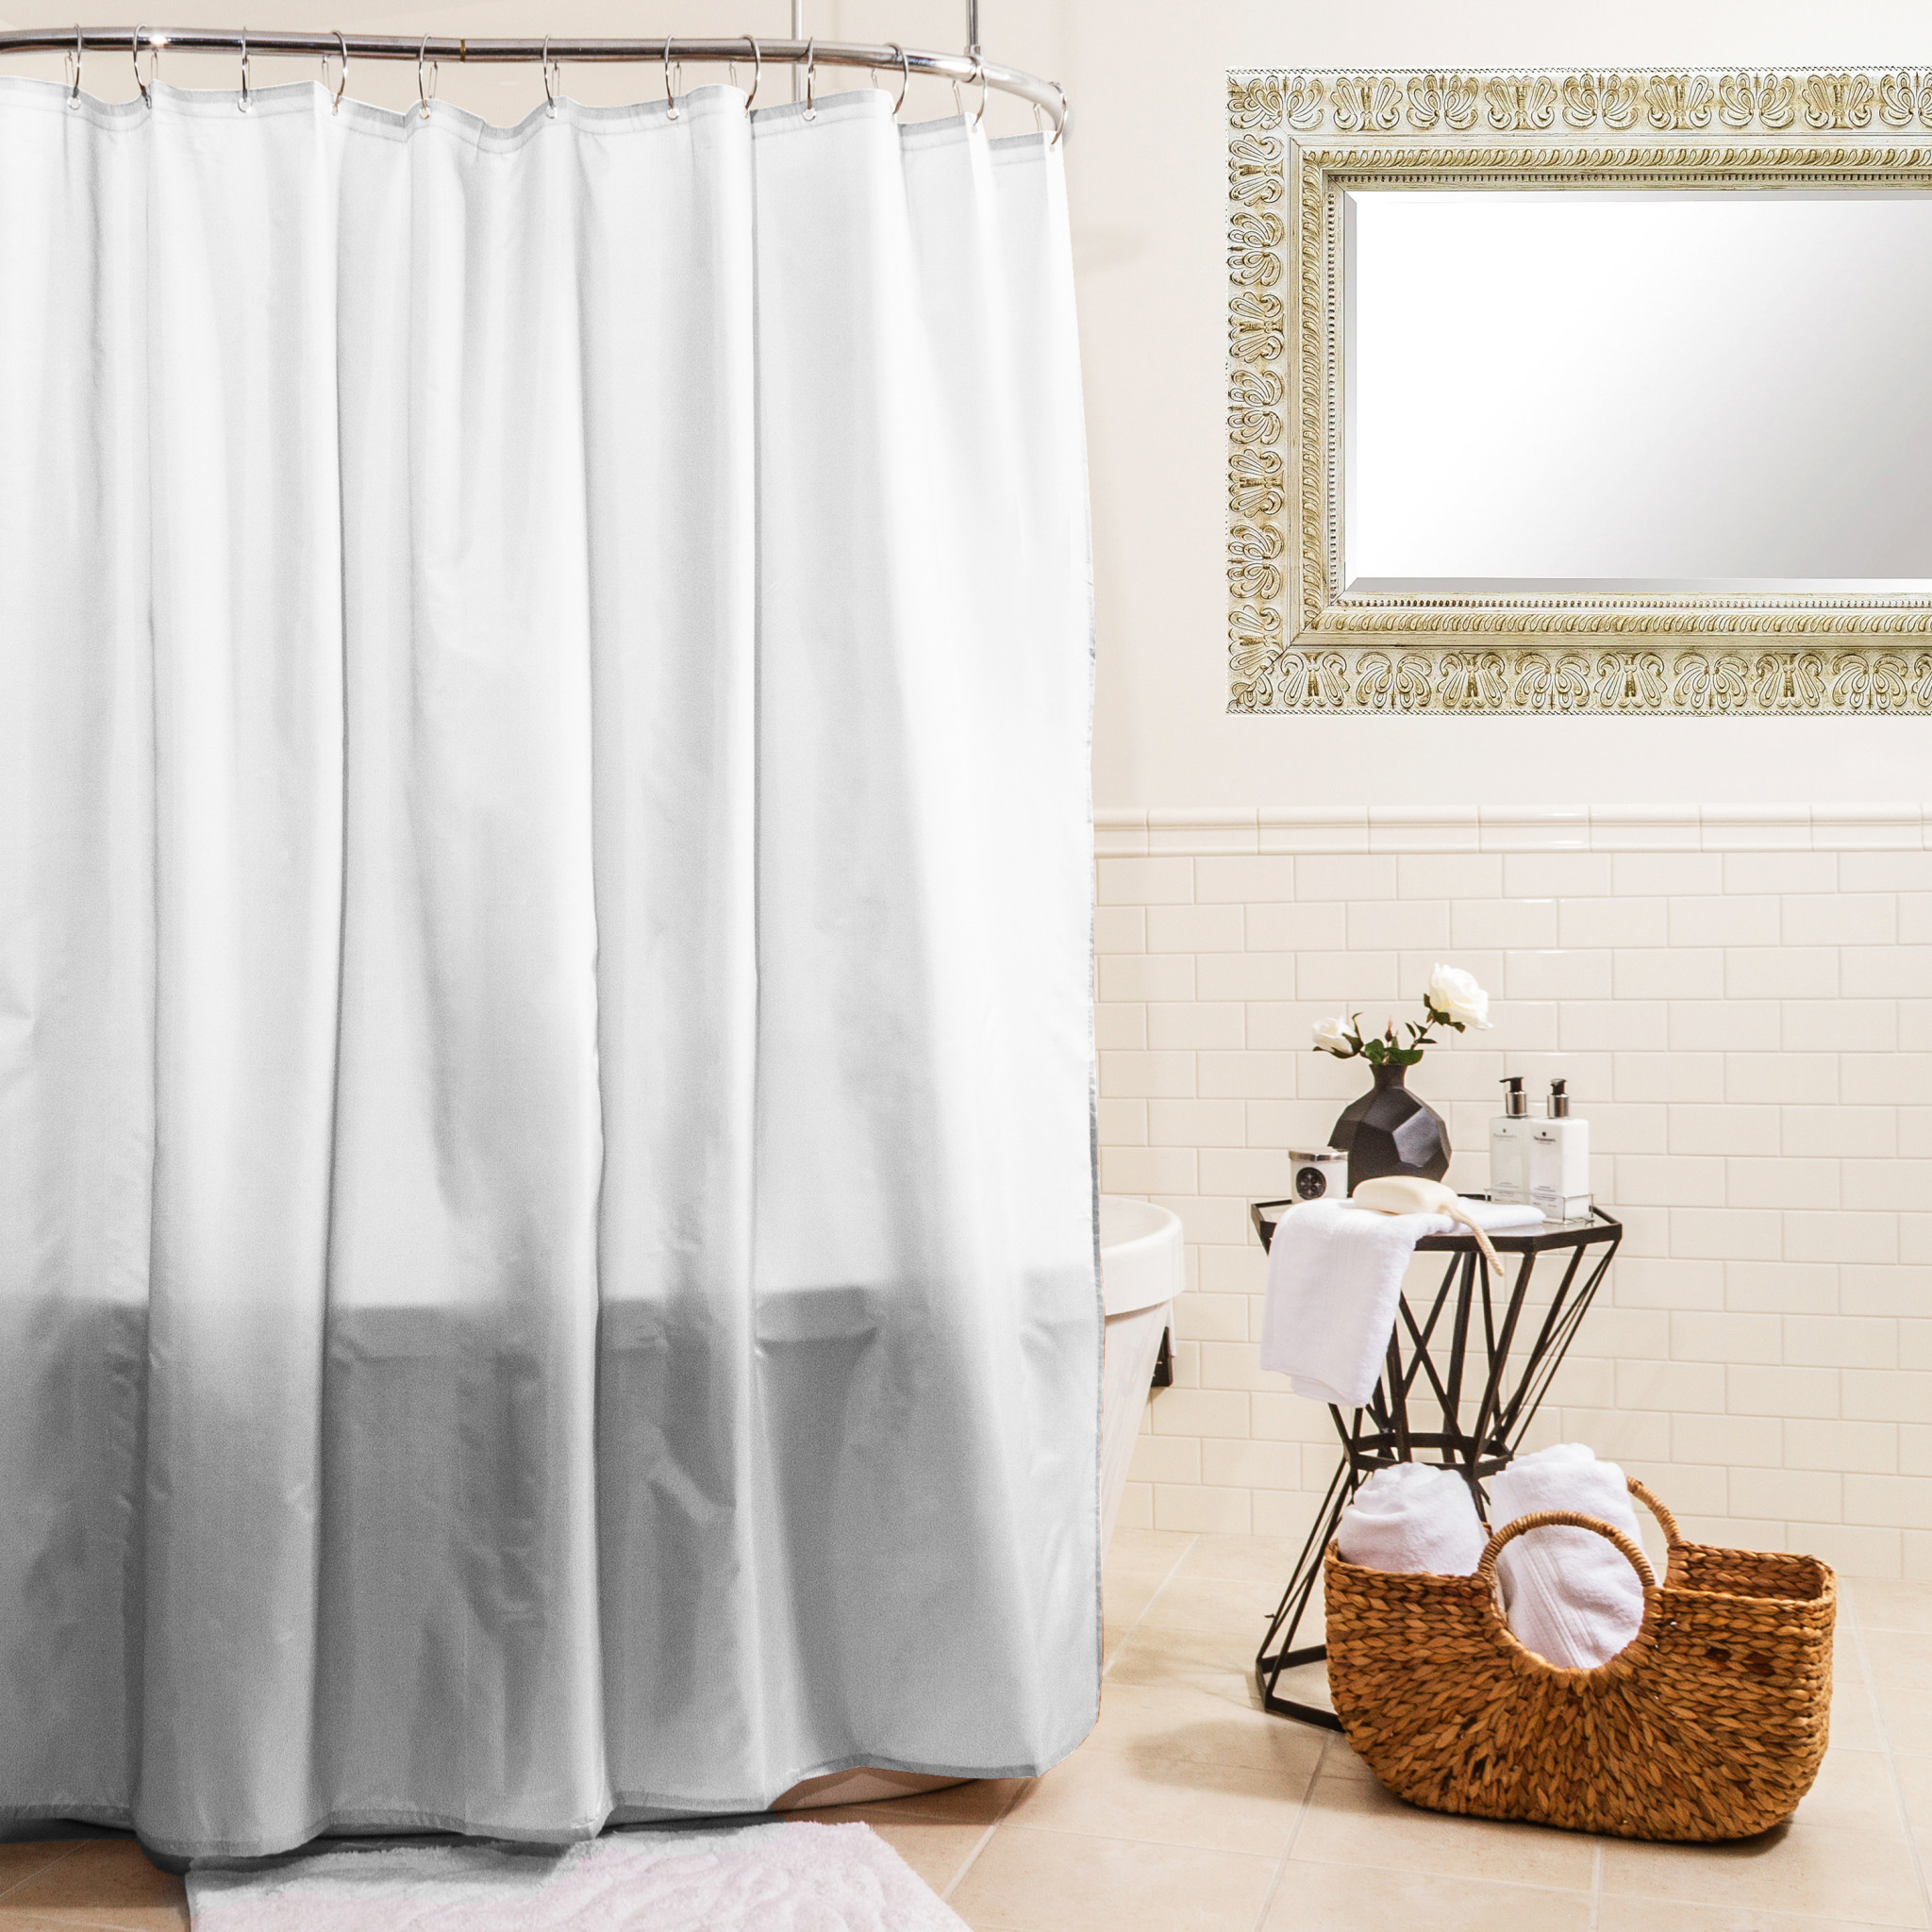 Hotel Quality Shower Curtain Oxford Mills Home Fashion Factory Outlet And Beddington S Bed Bath